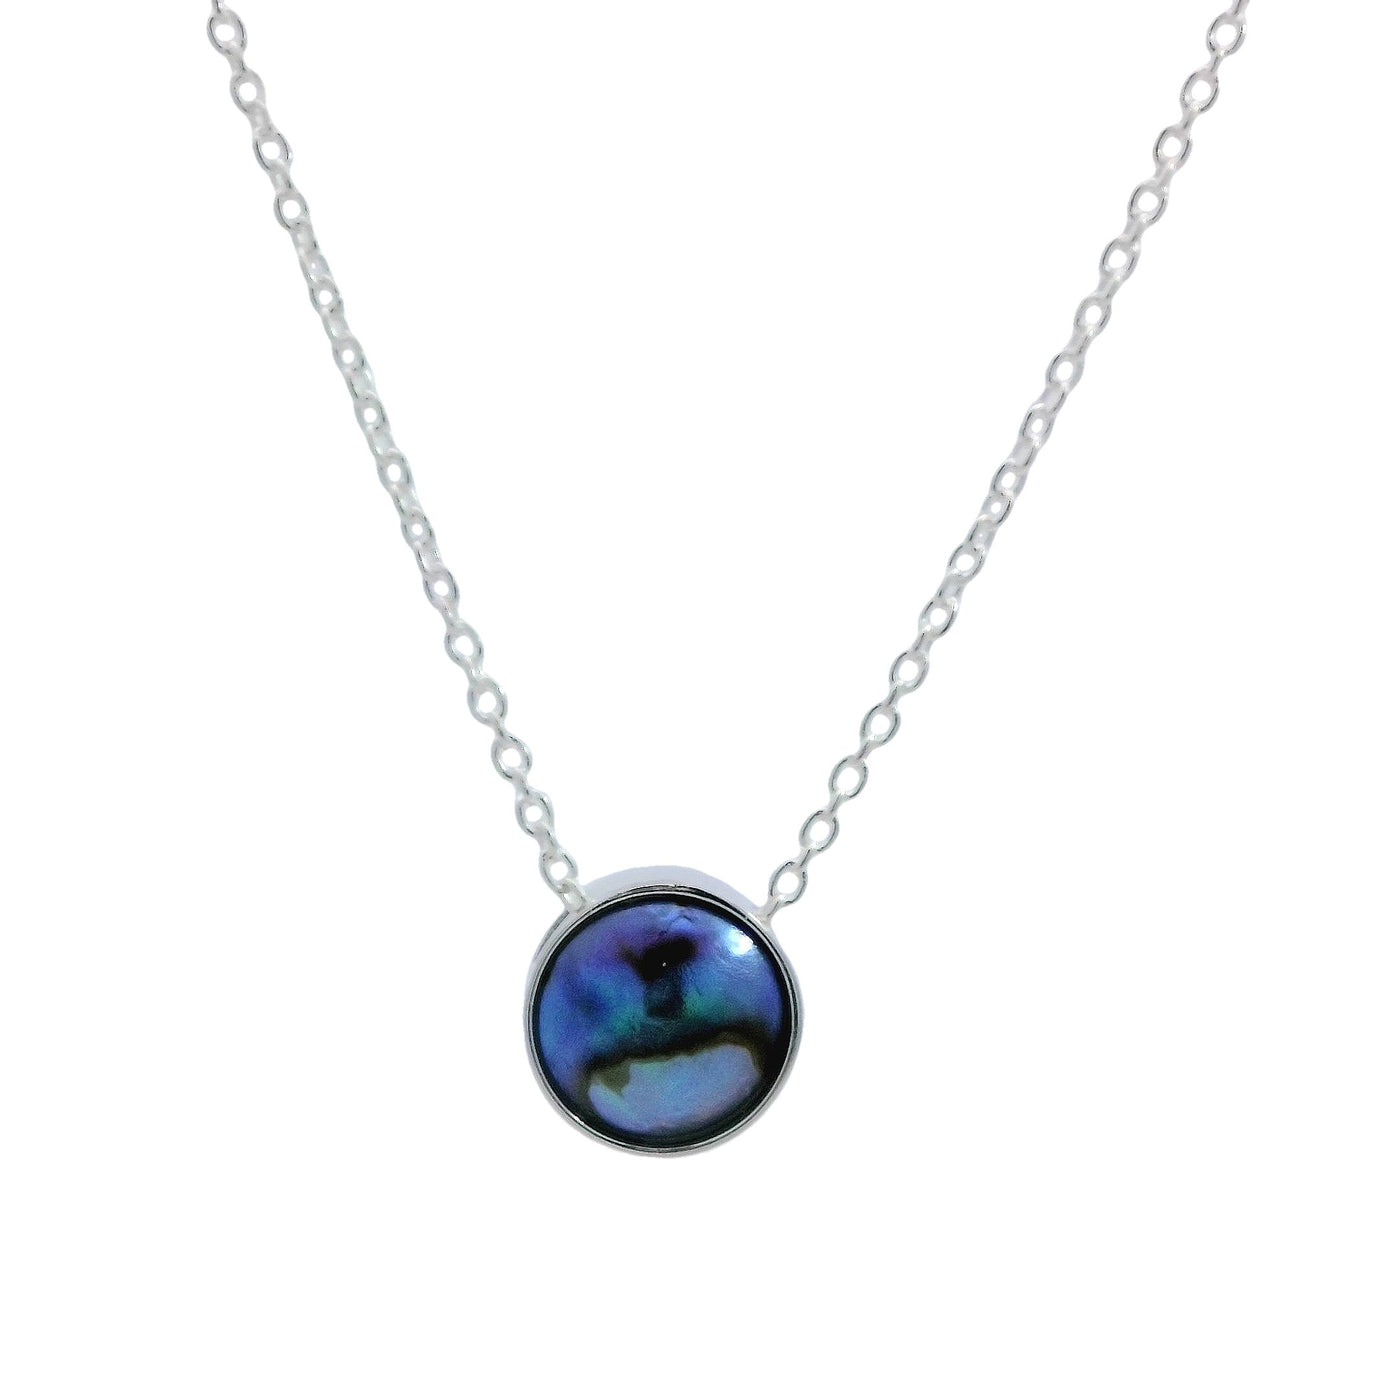 Pearl Moonrise Necklace - STG